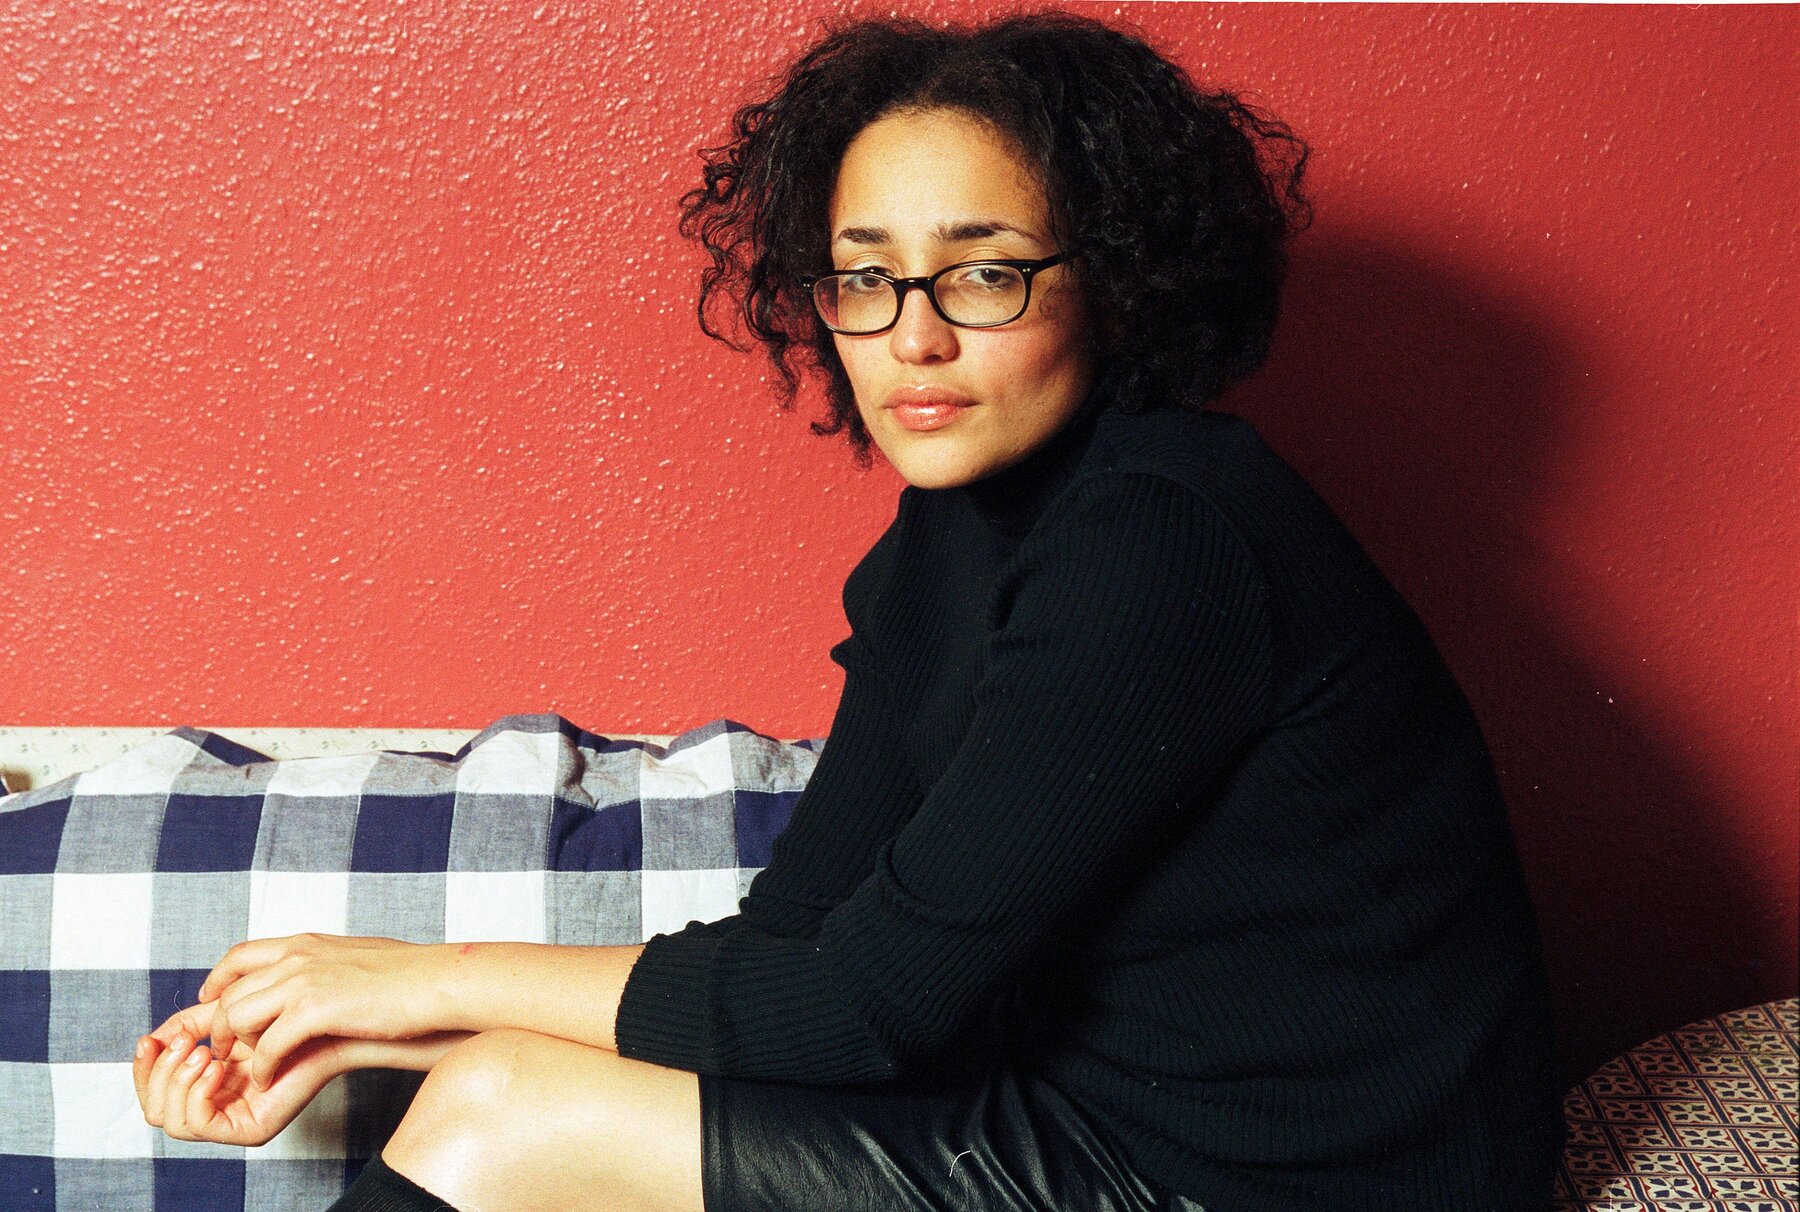 Zadie Smith, wearing a black top and glasses, with her hair parted in the center, sits and looks over her left shoulder towards the camera. The wall behind her is red.